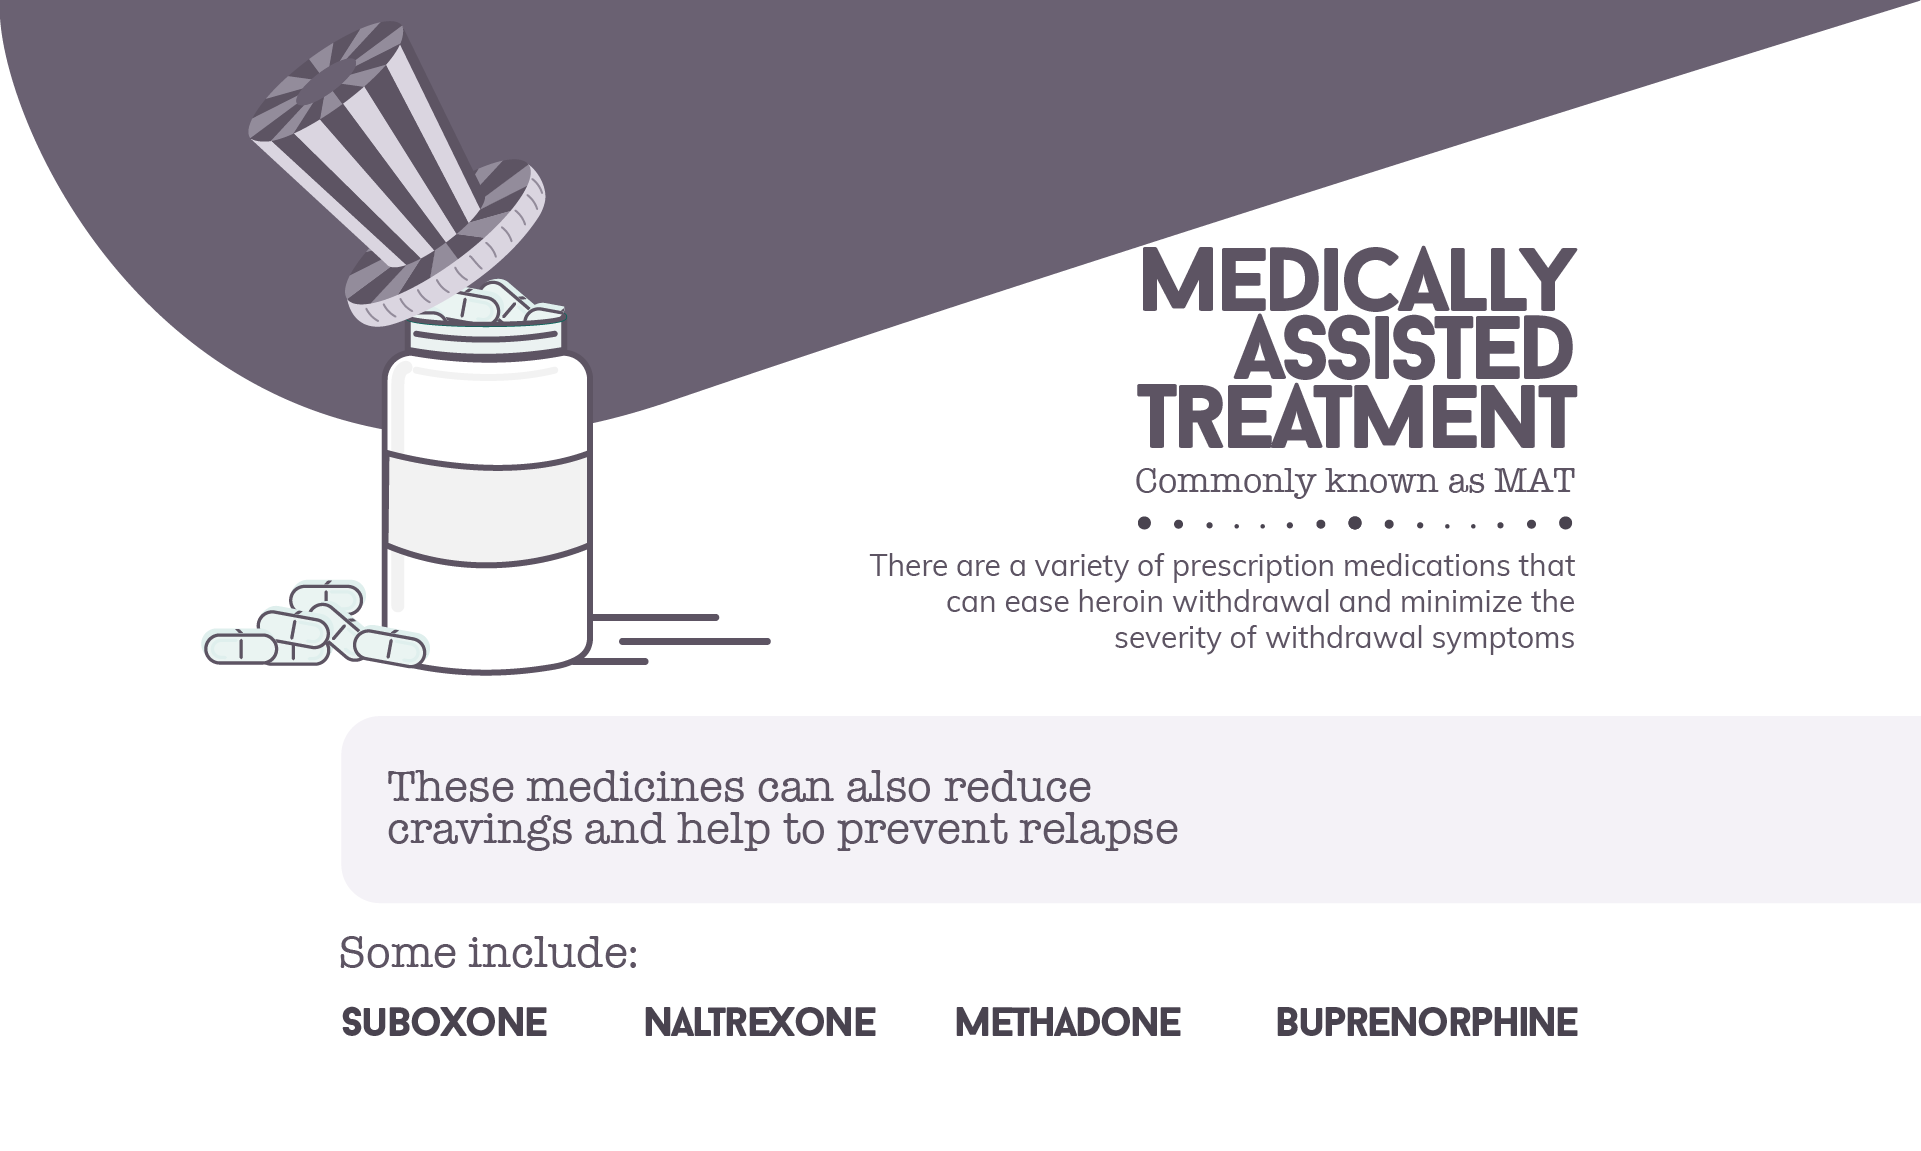 Medically Assisted Treatment